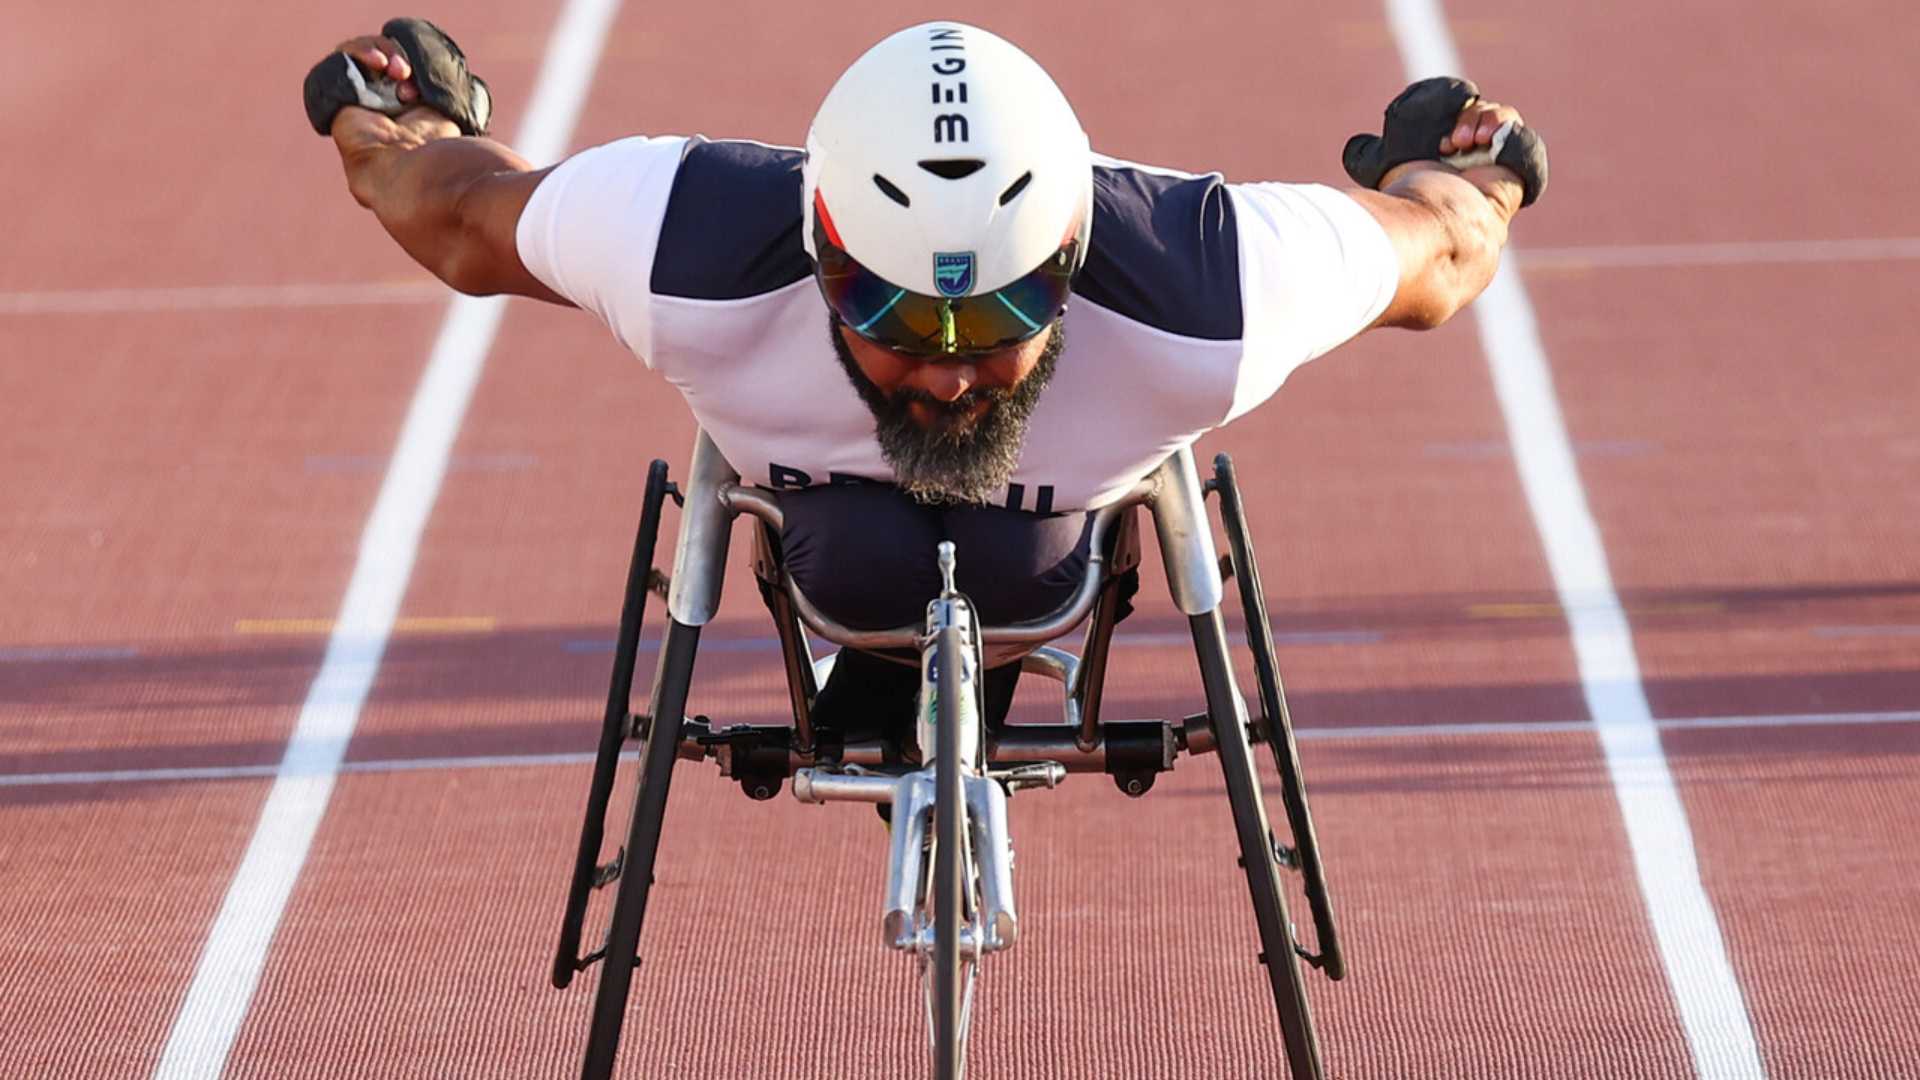 Three New Parapan American Records in Finals of 100 Meters